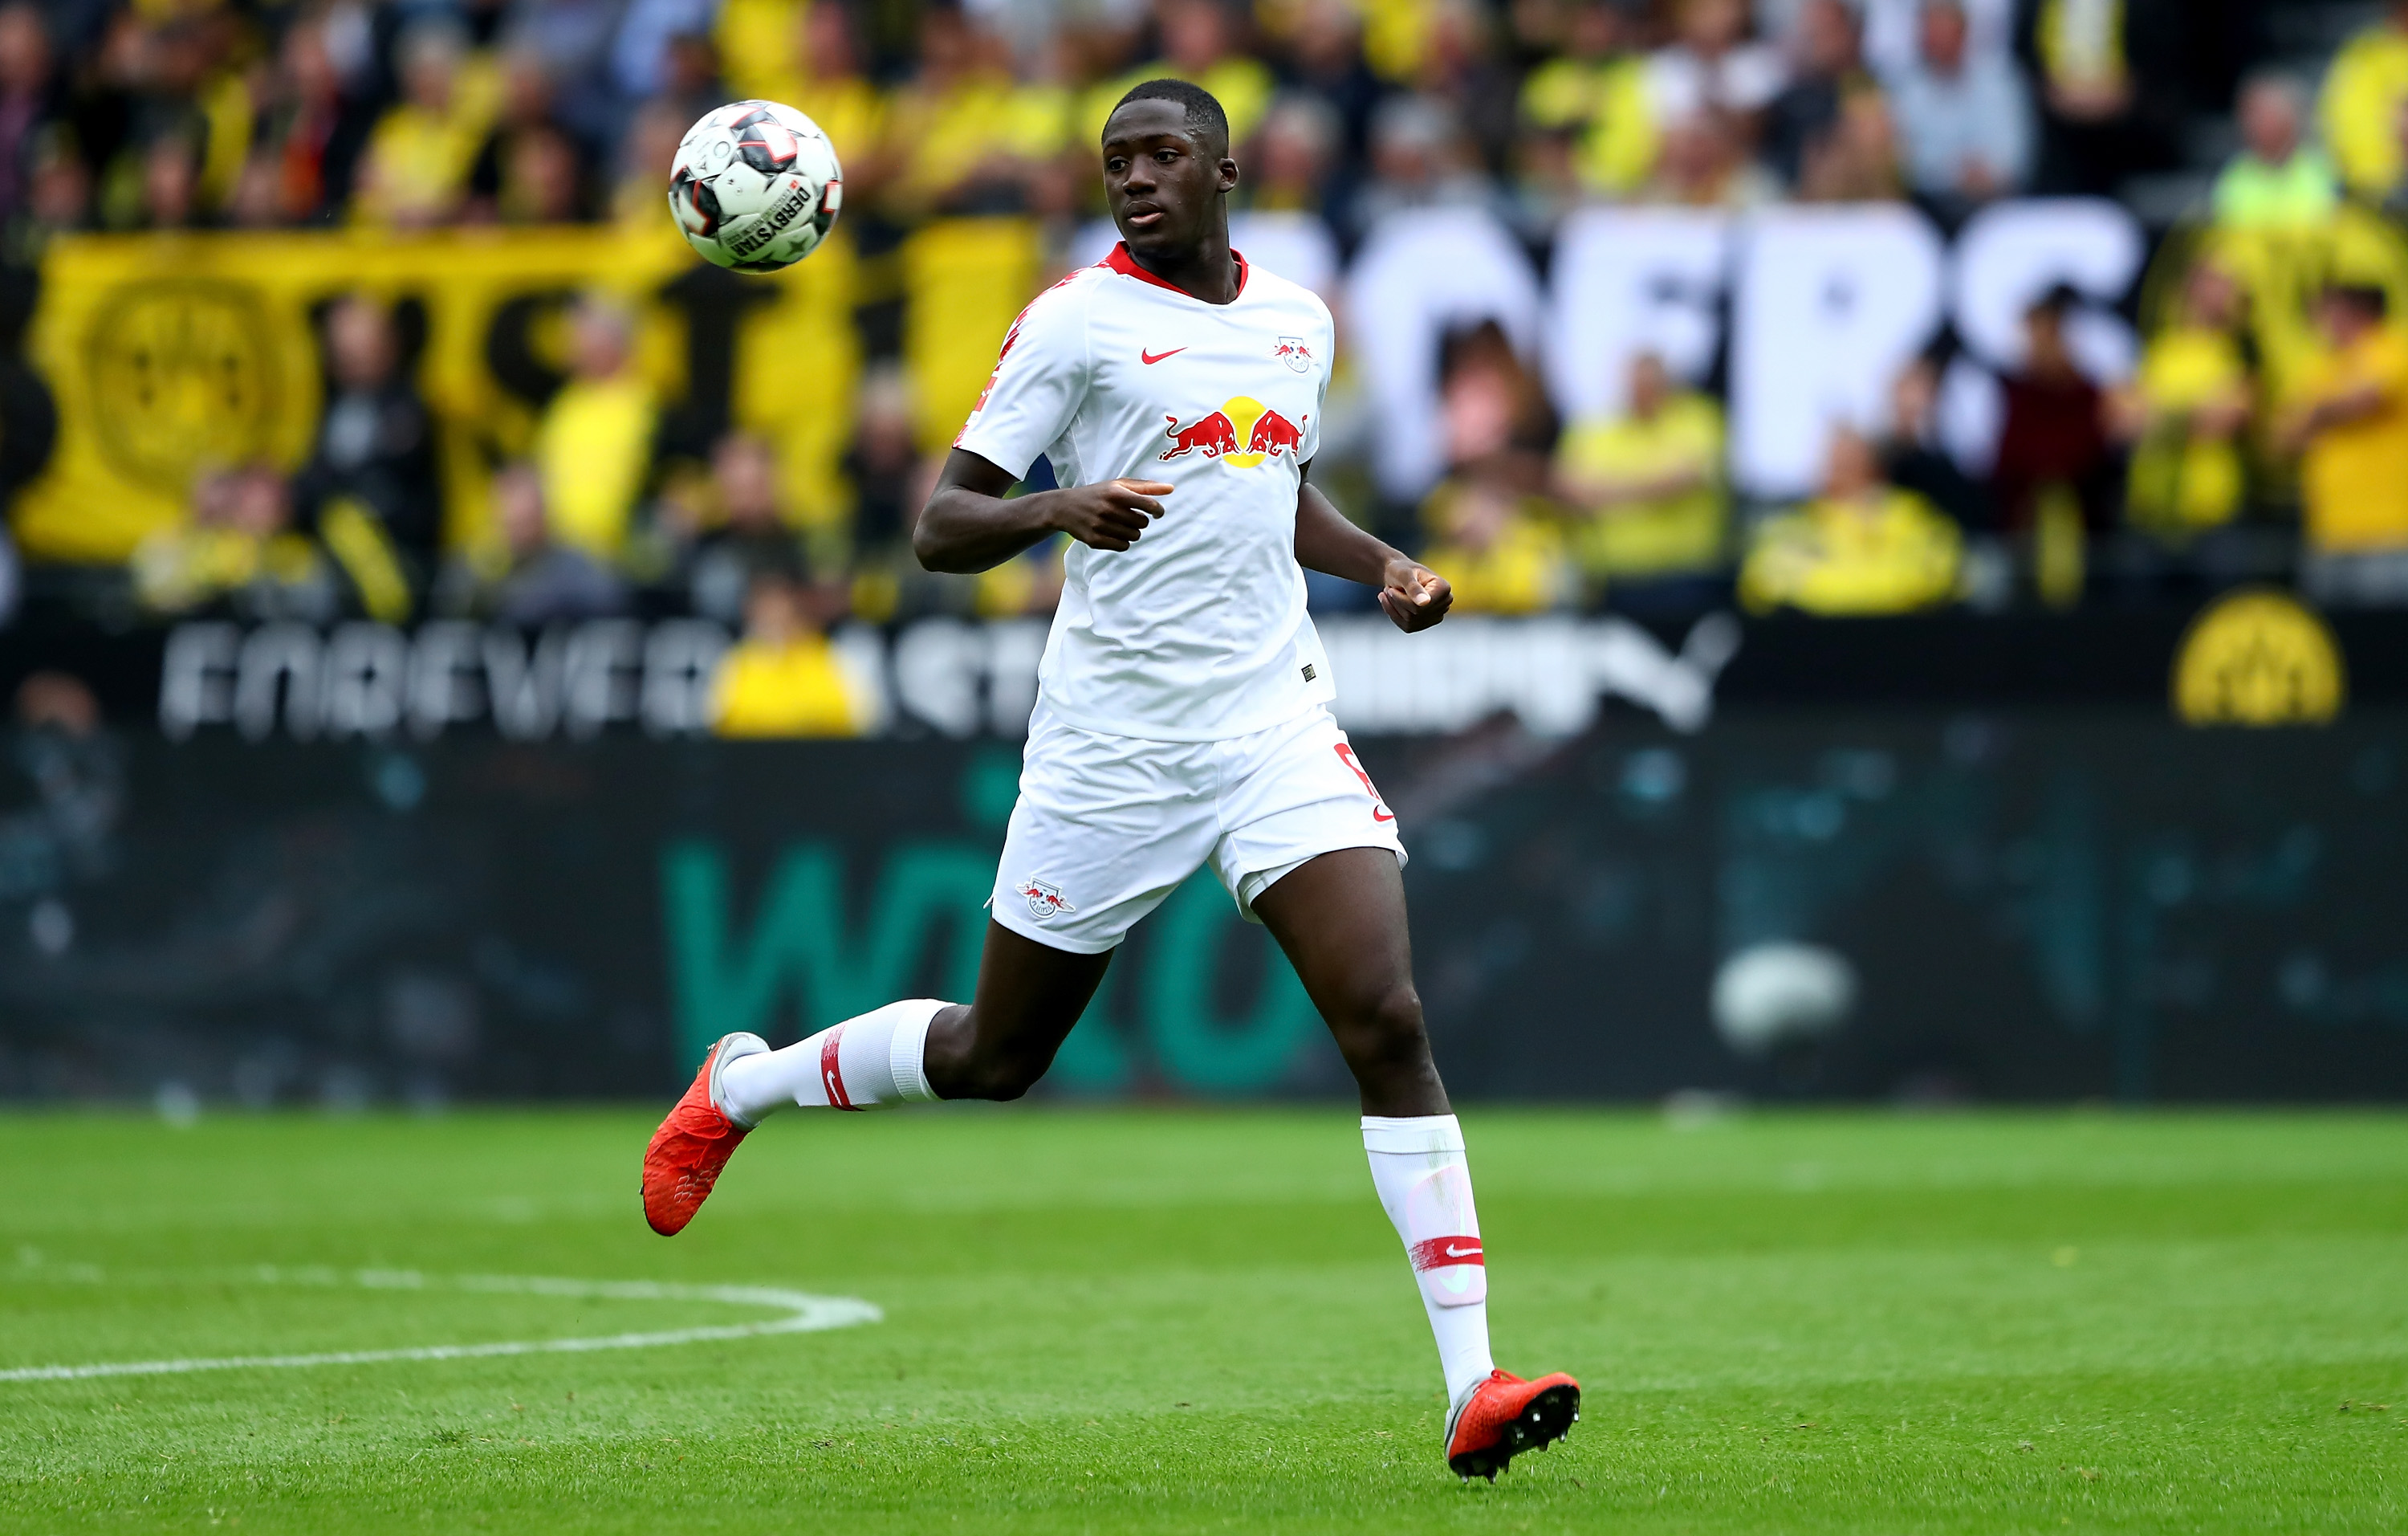 Ibrahima Konate has been Liverpool's only signing this summer. (Photo by Martin Rose/Bongarts/Getty Images)